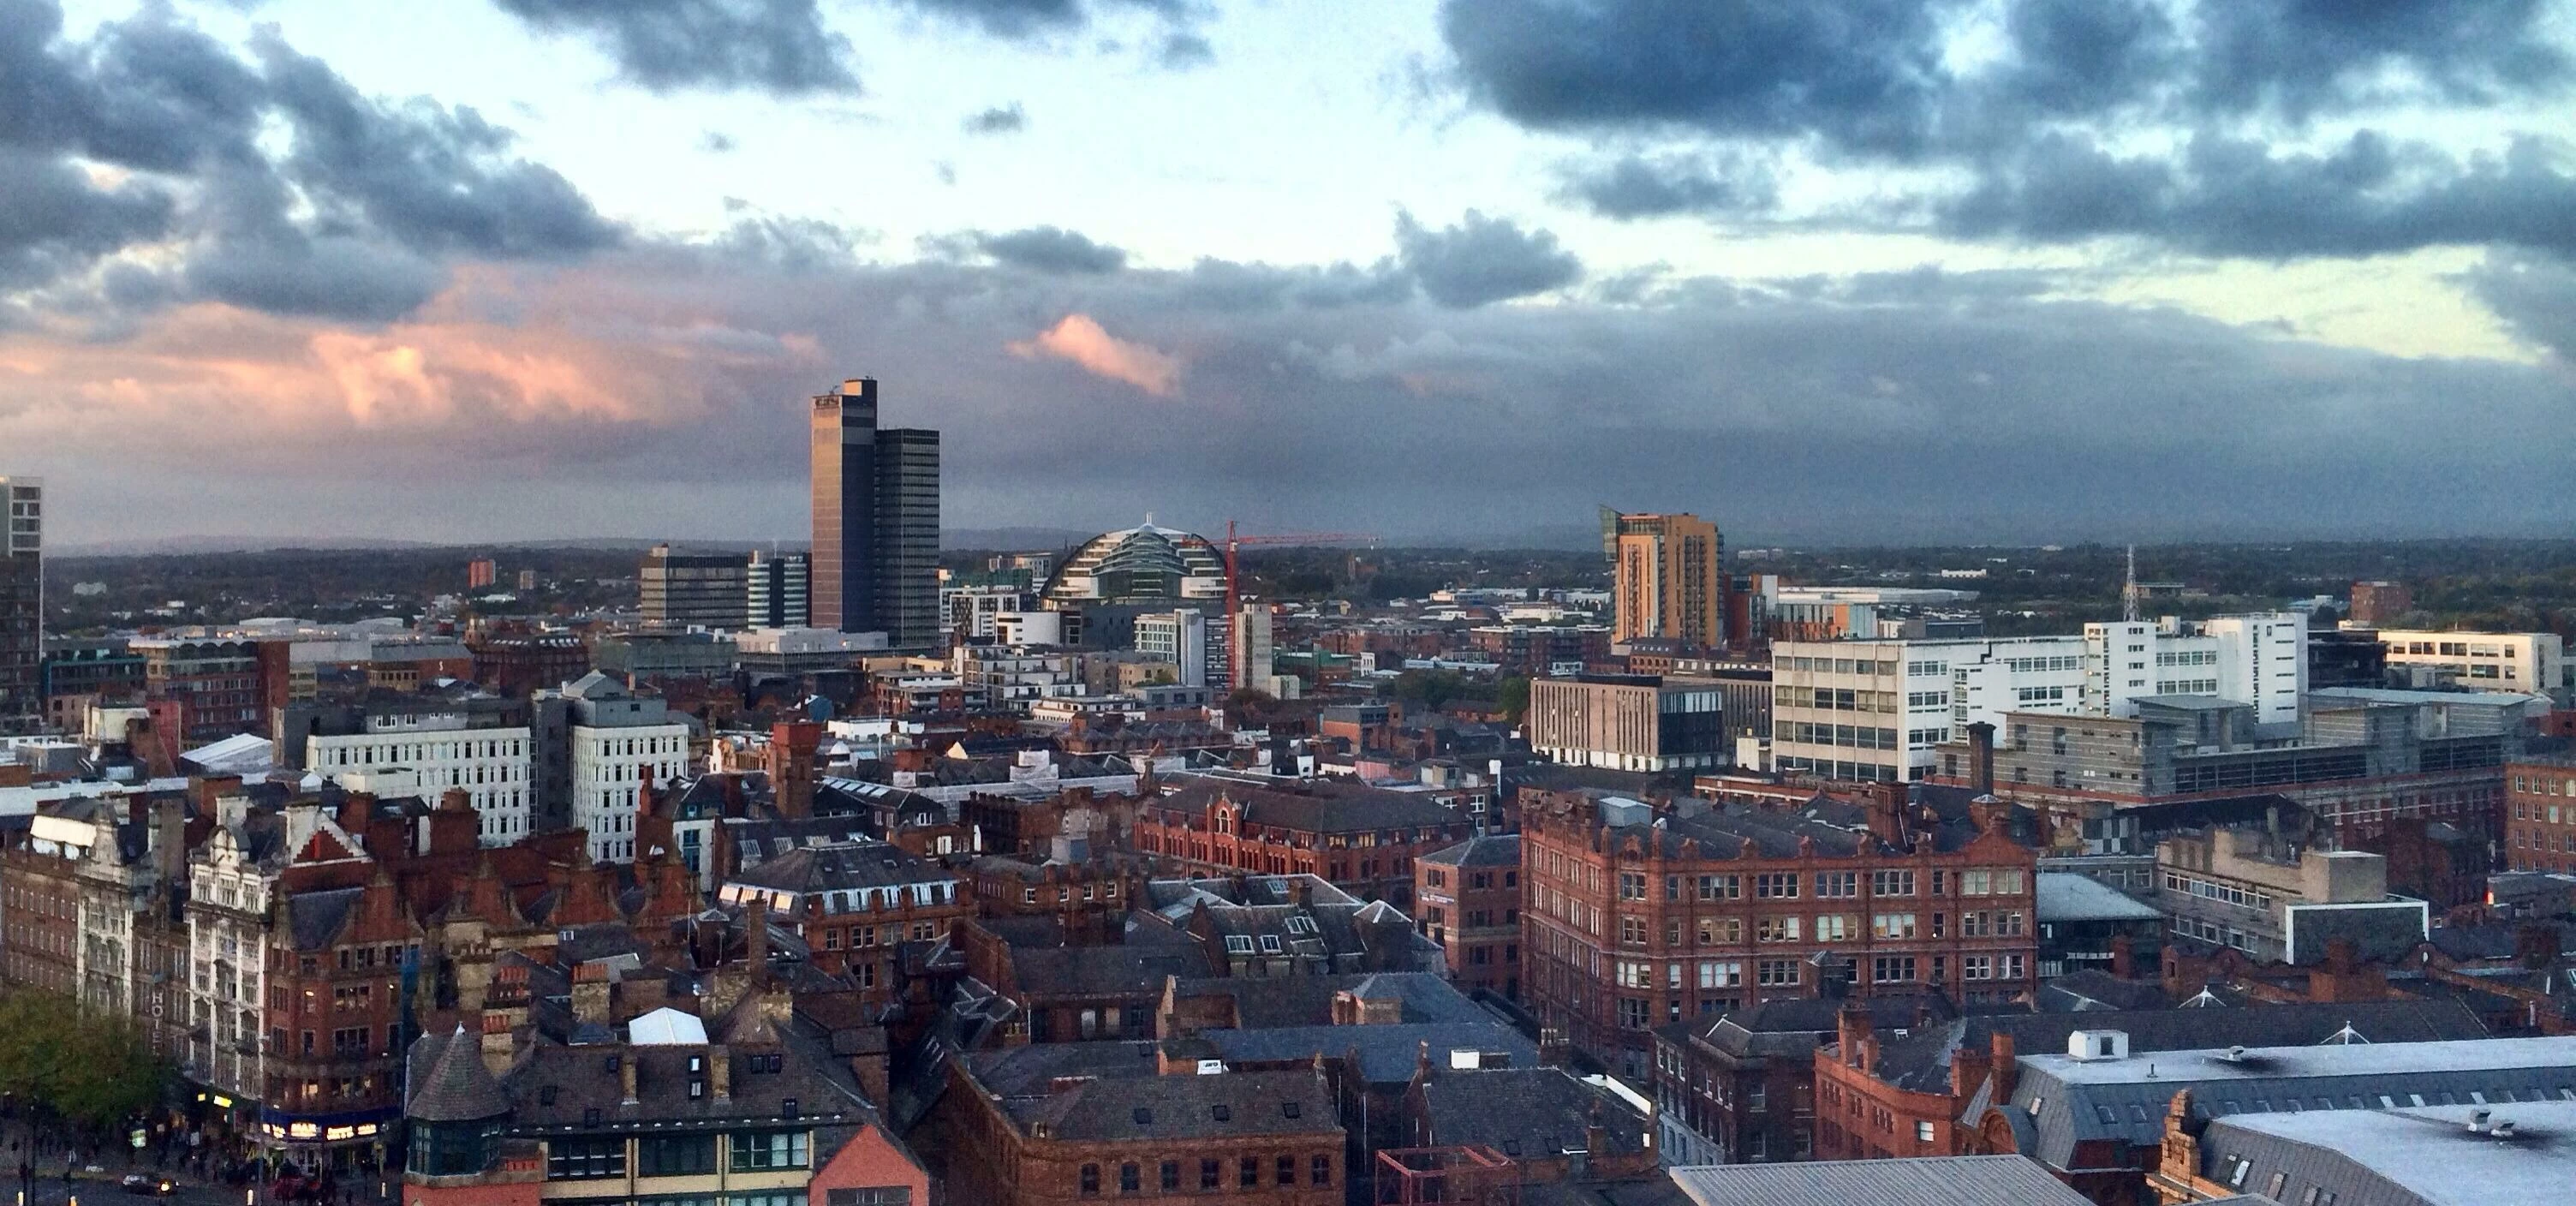 Manchester Northern Quarter - a view from a 15th floor